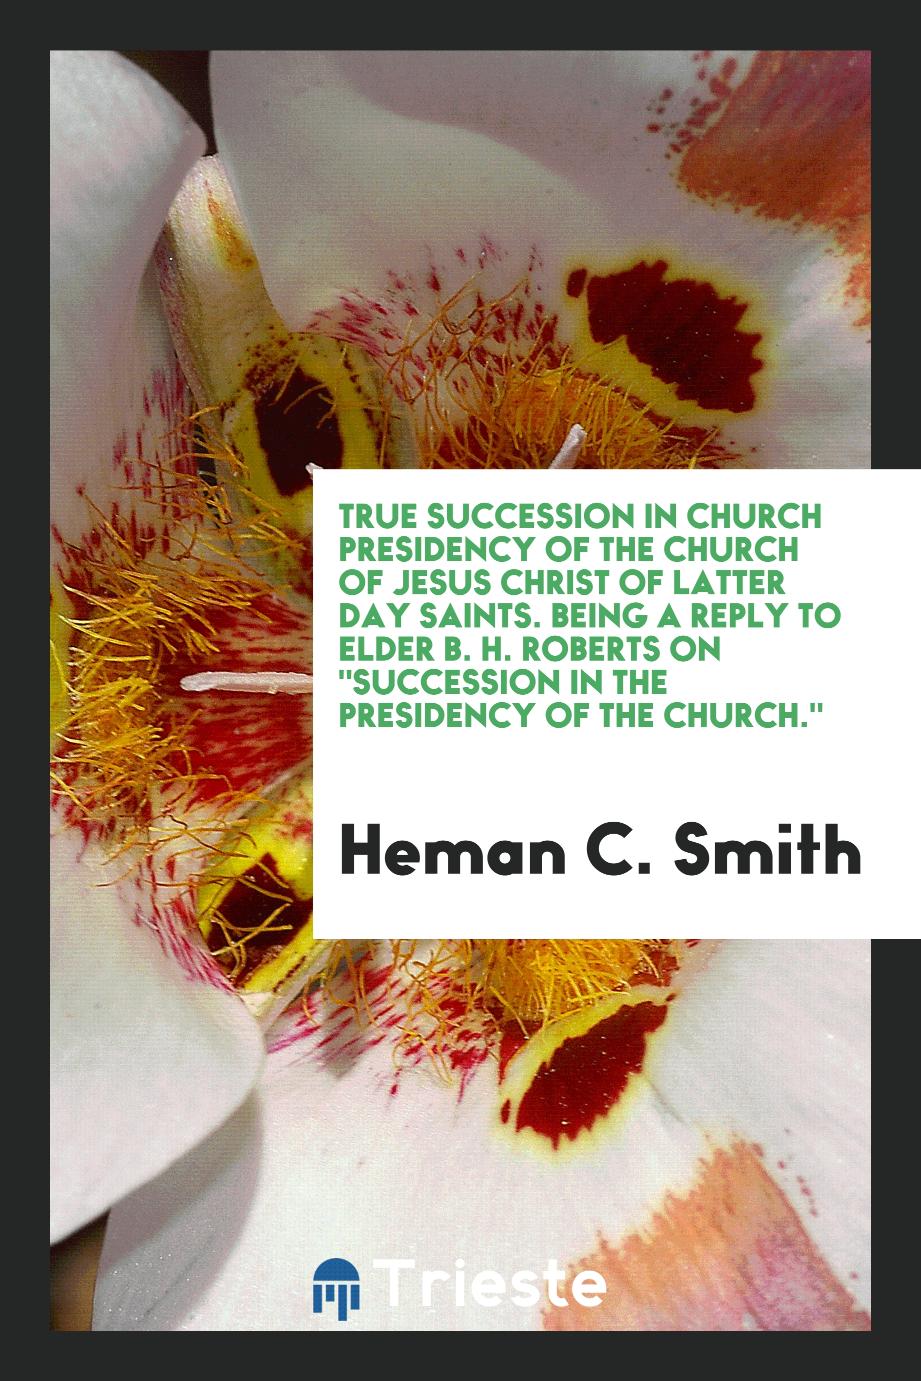 True succession in church presidency of the Church of Jesus Christ of latter day saints. Being a reply to Elder B. H. Roberts on "Succession in the presidency of the church."